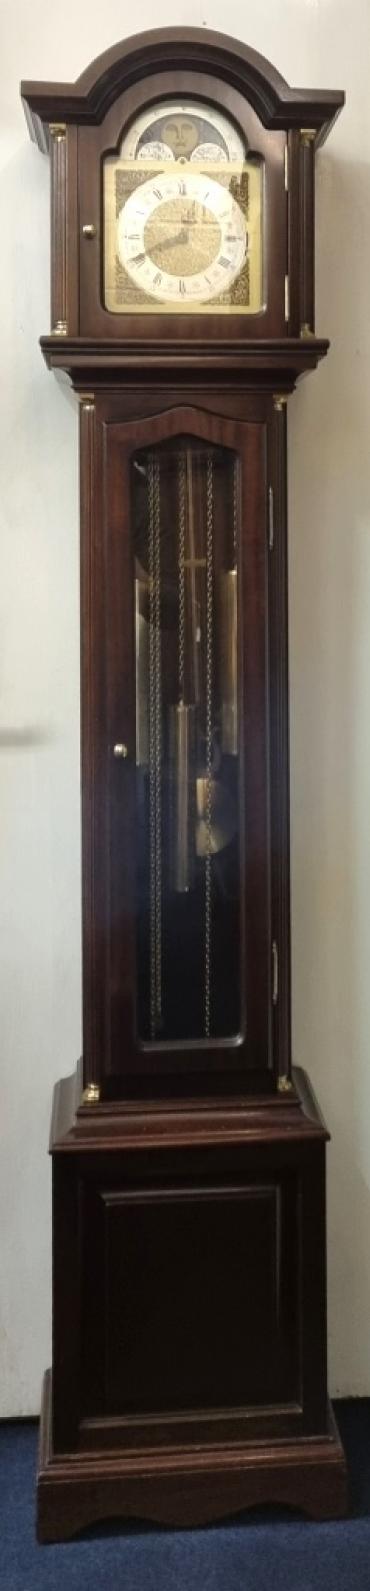 Mahogany cased 8 day, weight driven, pendulum regulated Westminster chime longcase / grandmother clock. Round topped hood with fluted columns and break arch dial with moon phase and applied brass spandrels around the silvered chapter ring. Black Roman hours and gothic style black hands with a Chime / Silent selection lever at 3 o'clock. Fluted columns repeated to the lower case with glazed door displaying the brass weights and pendulum. Case dimensions - Height 61", Width 14.5", Depth 9.5".